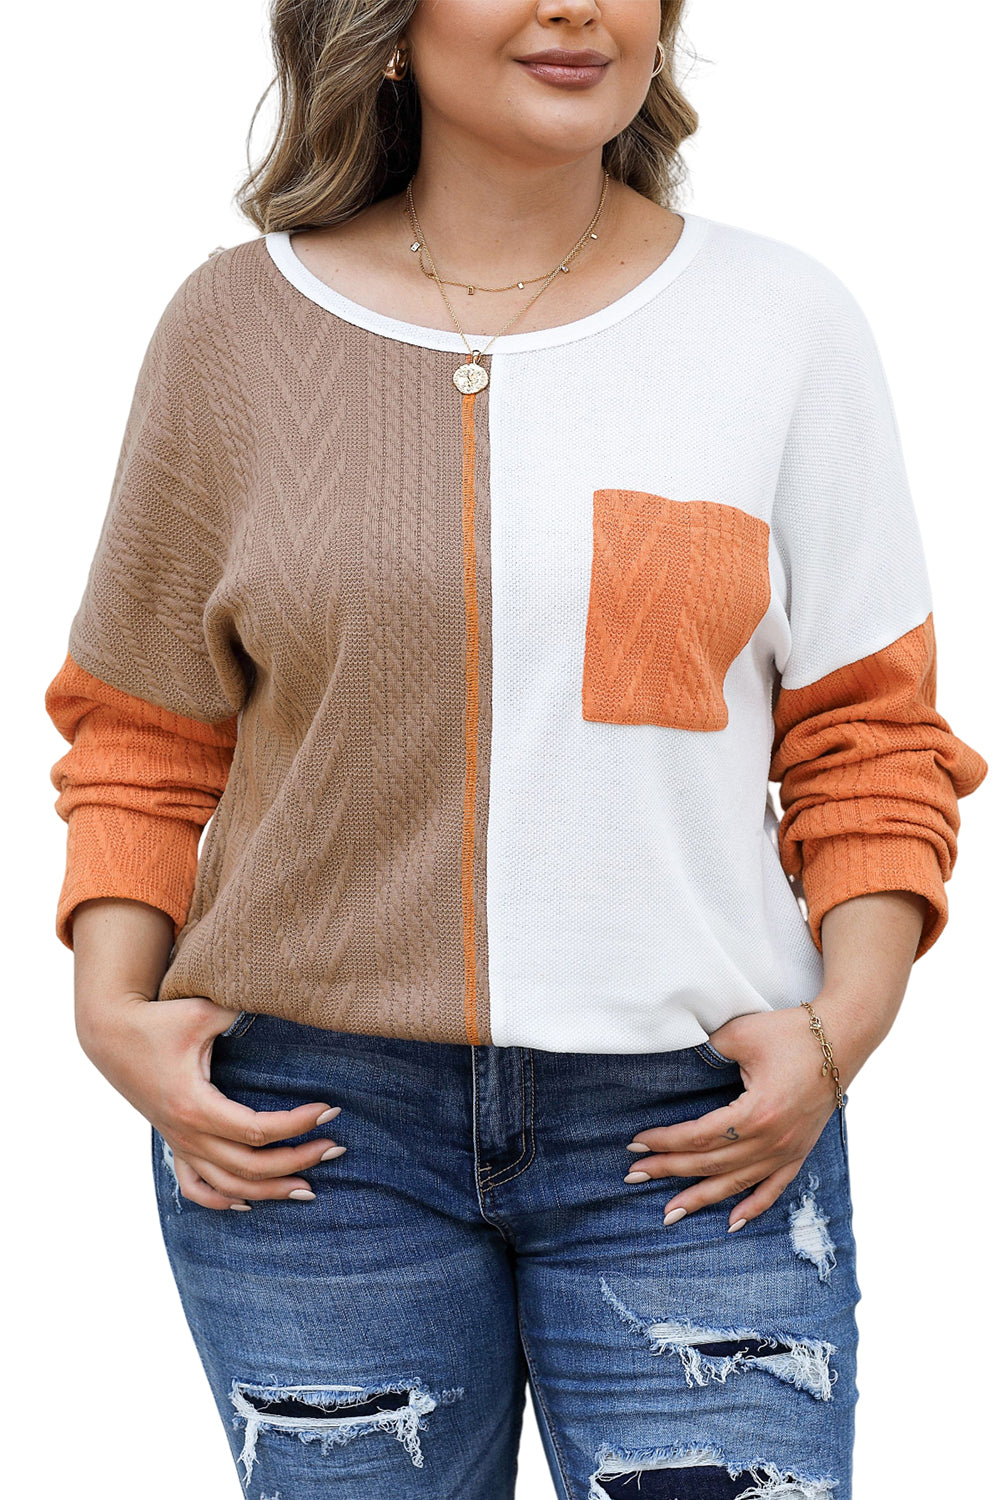 Black Long Sleeve Colorblock Chest Pocket Textured Knit Top